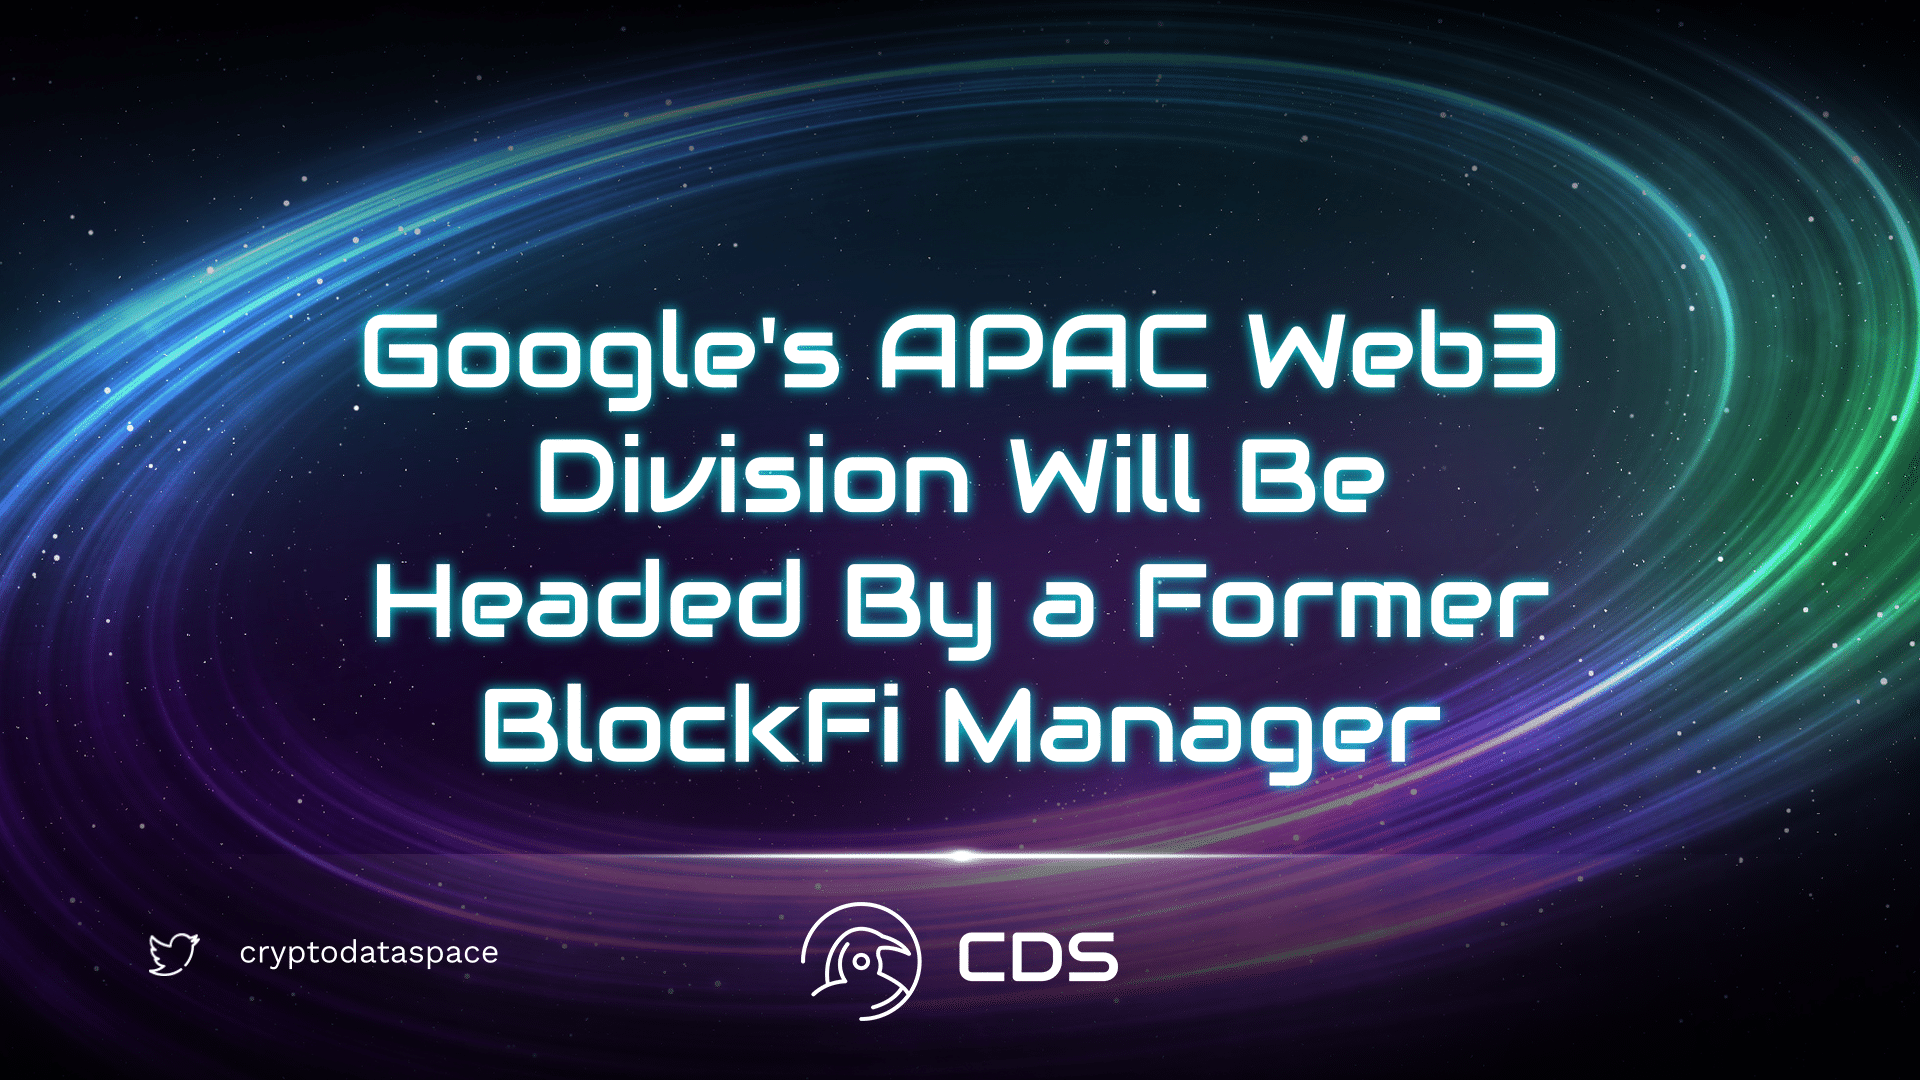 Google's APAC Web3 Division Will Be Headed By a Former BlockFi Manager